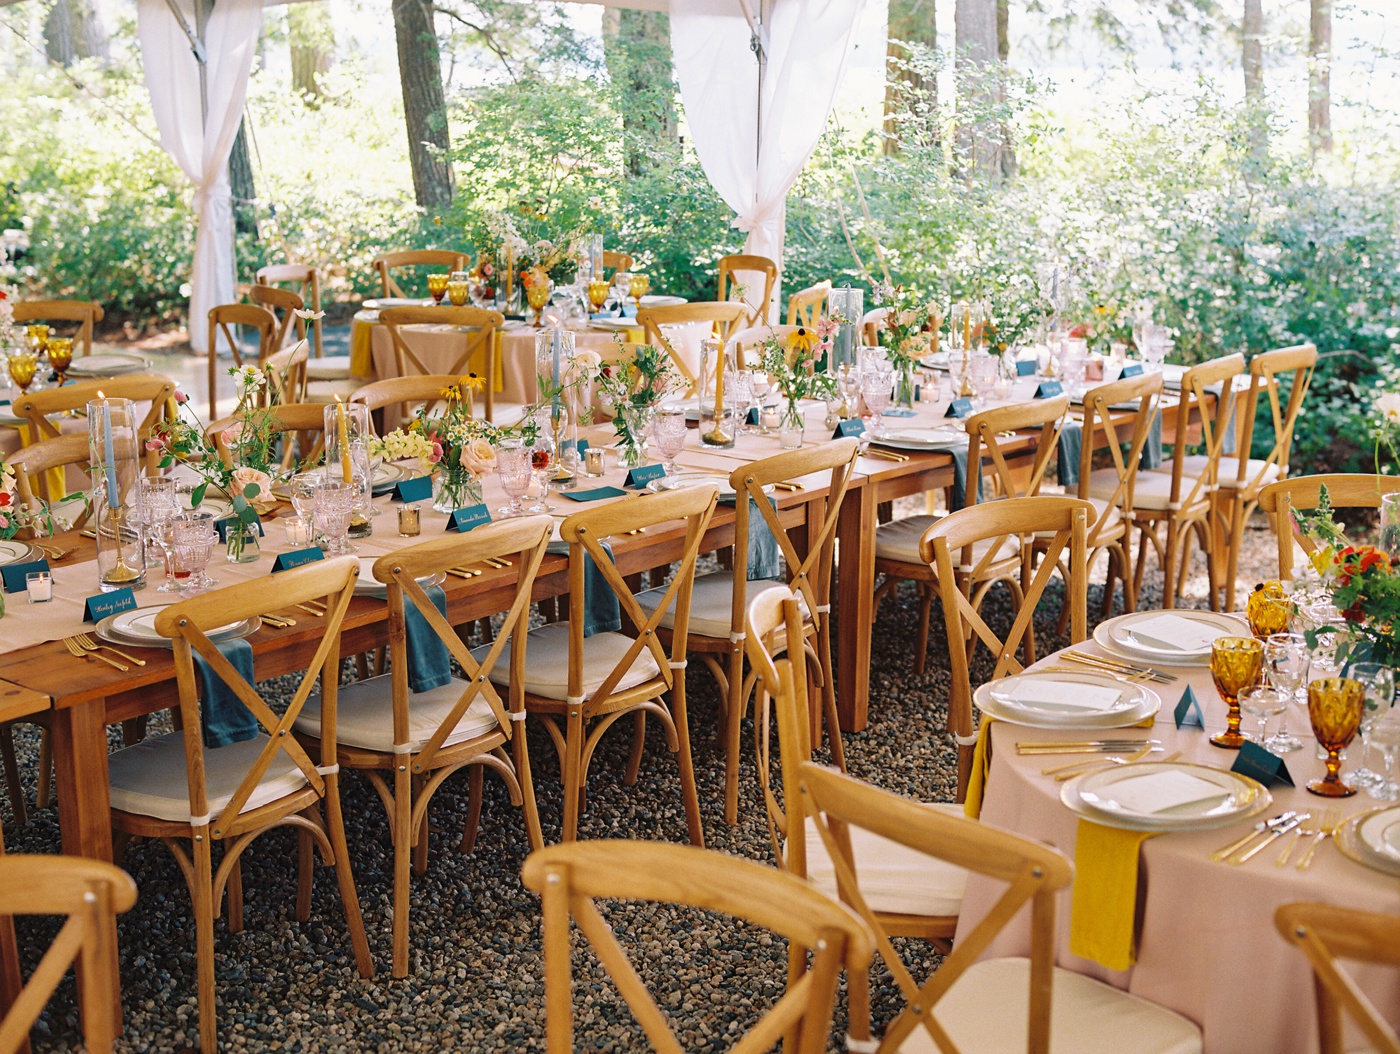 Pink tablecloths, yellow napkins, and blue place cards for a colorful wedding reception